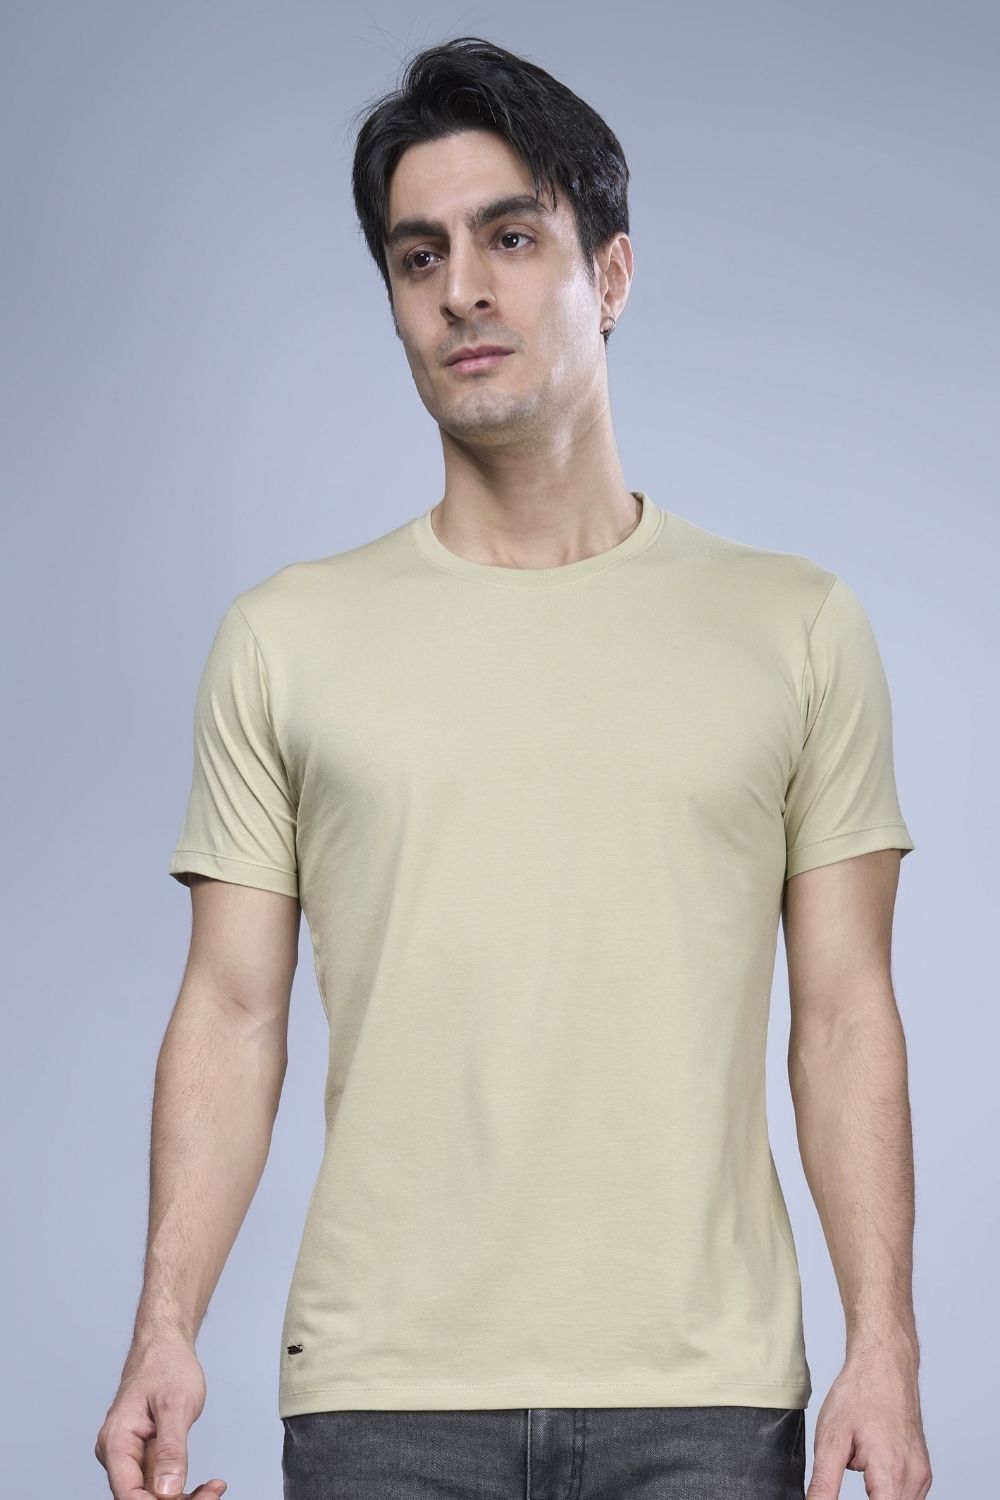 Cotton Stretch T shirt for men in the the solid color pale green with half sleeves and round neck, front view.